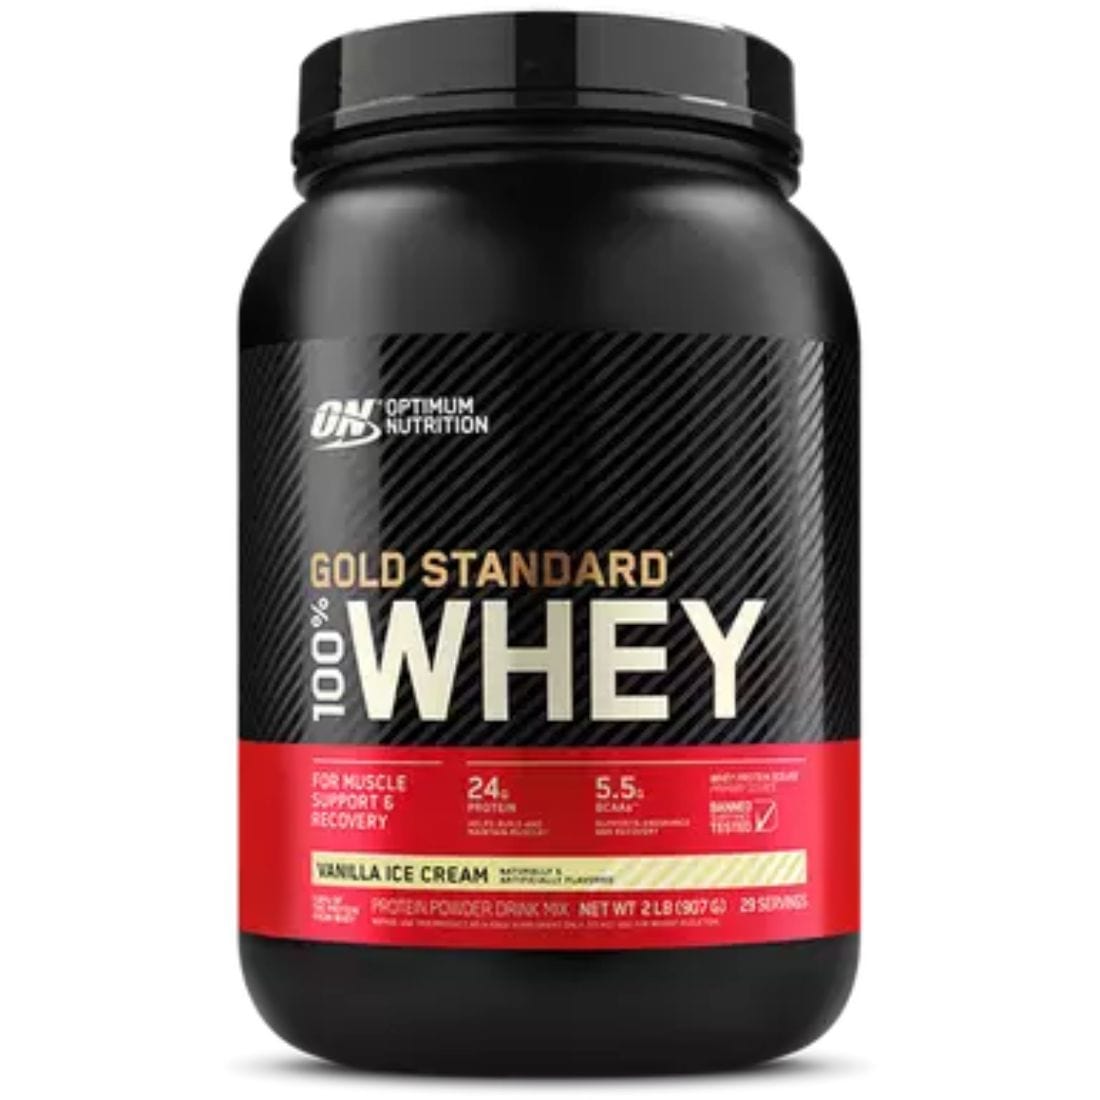 Optimum Gold Standard 100% Whey Protein, Gluten-Free, Banned Substance Tested